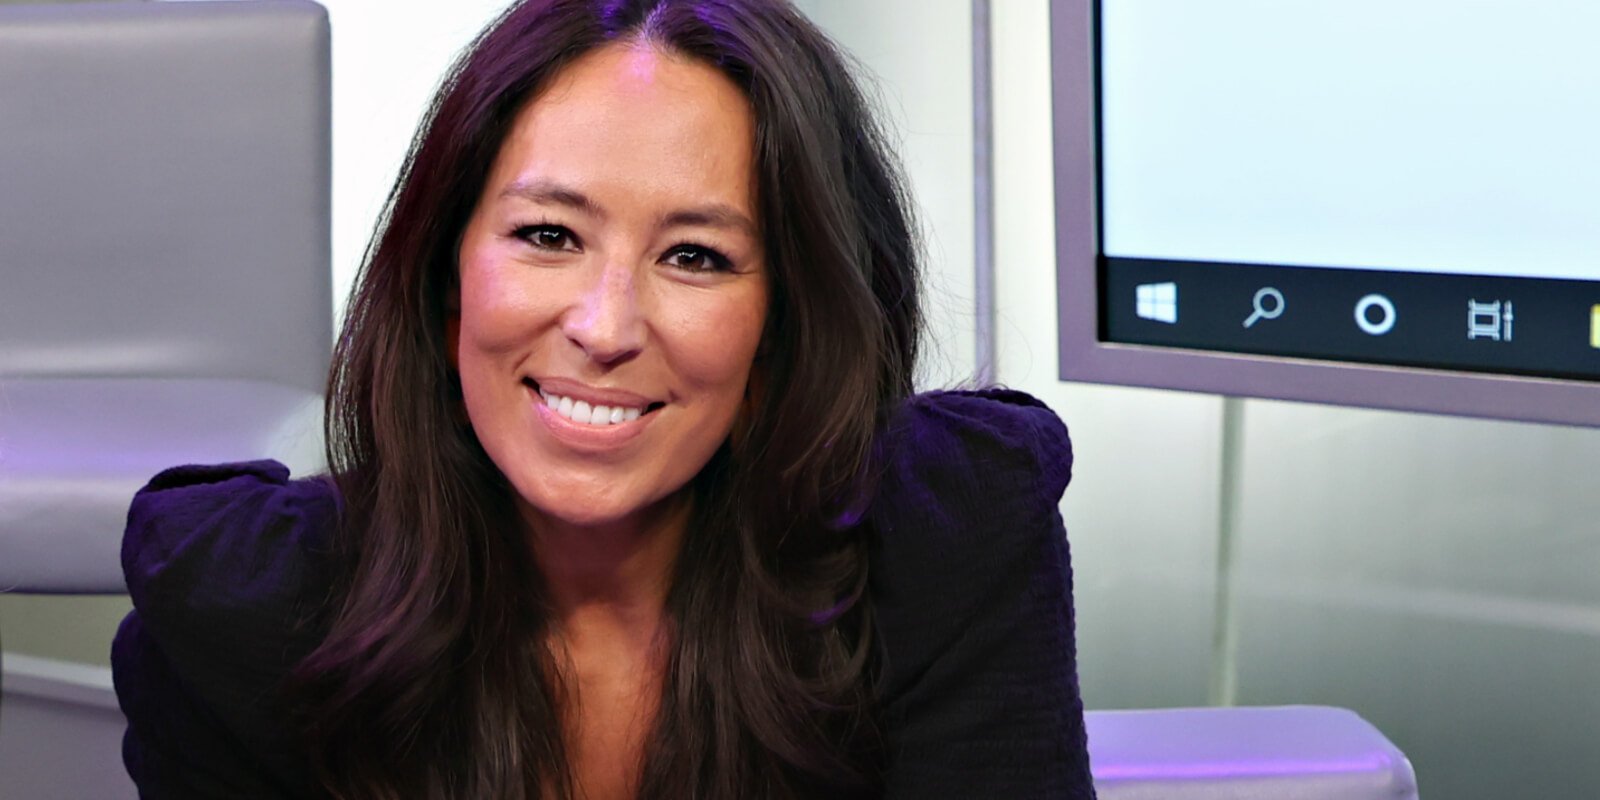 Joanna Gaines during an interview broadcast on Sirius XM in 2021.